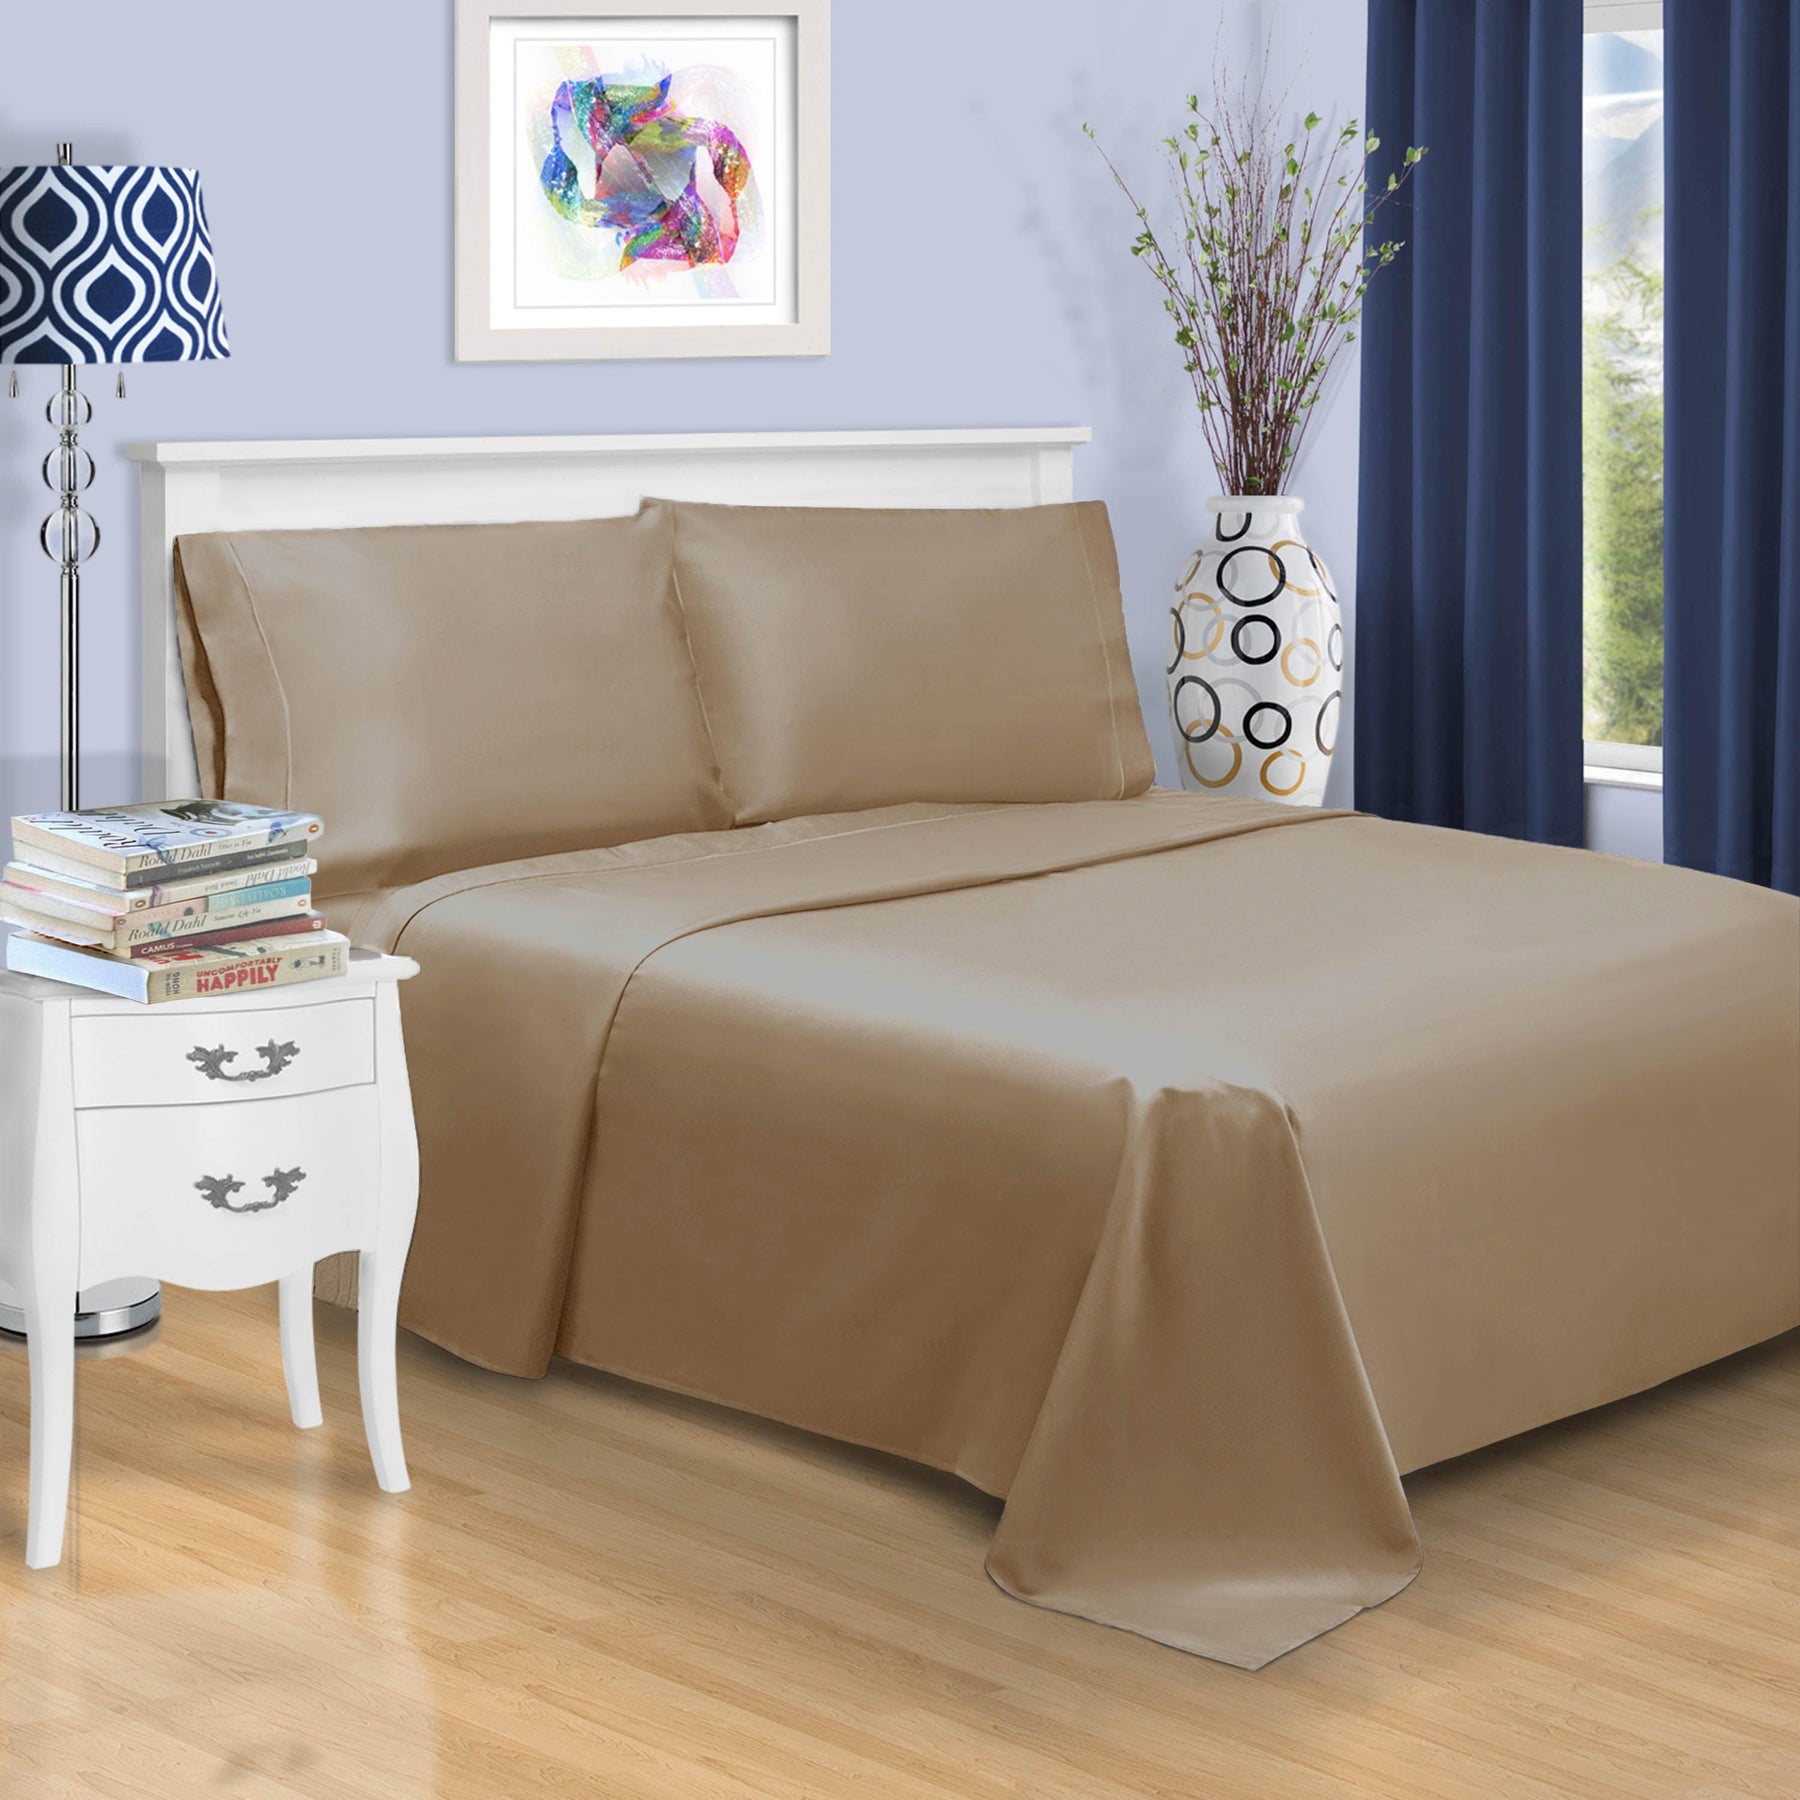  Superior Solid 1500-Thread Count Ultra-Soft Cotton Marrow Stitch Sheet Set - Taupe